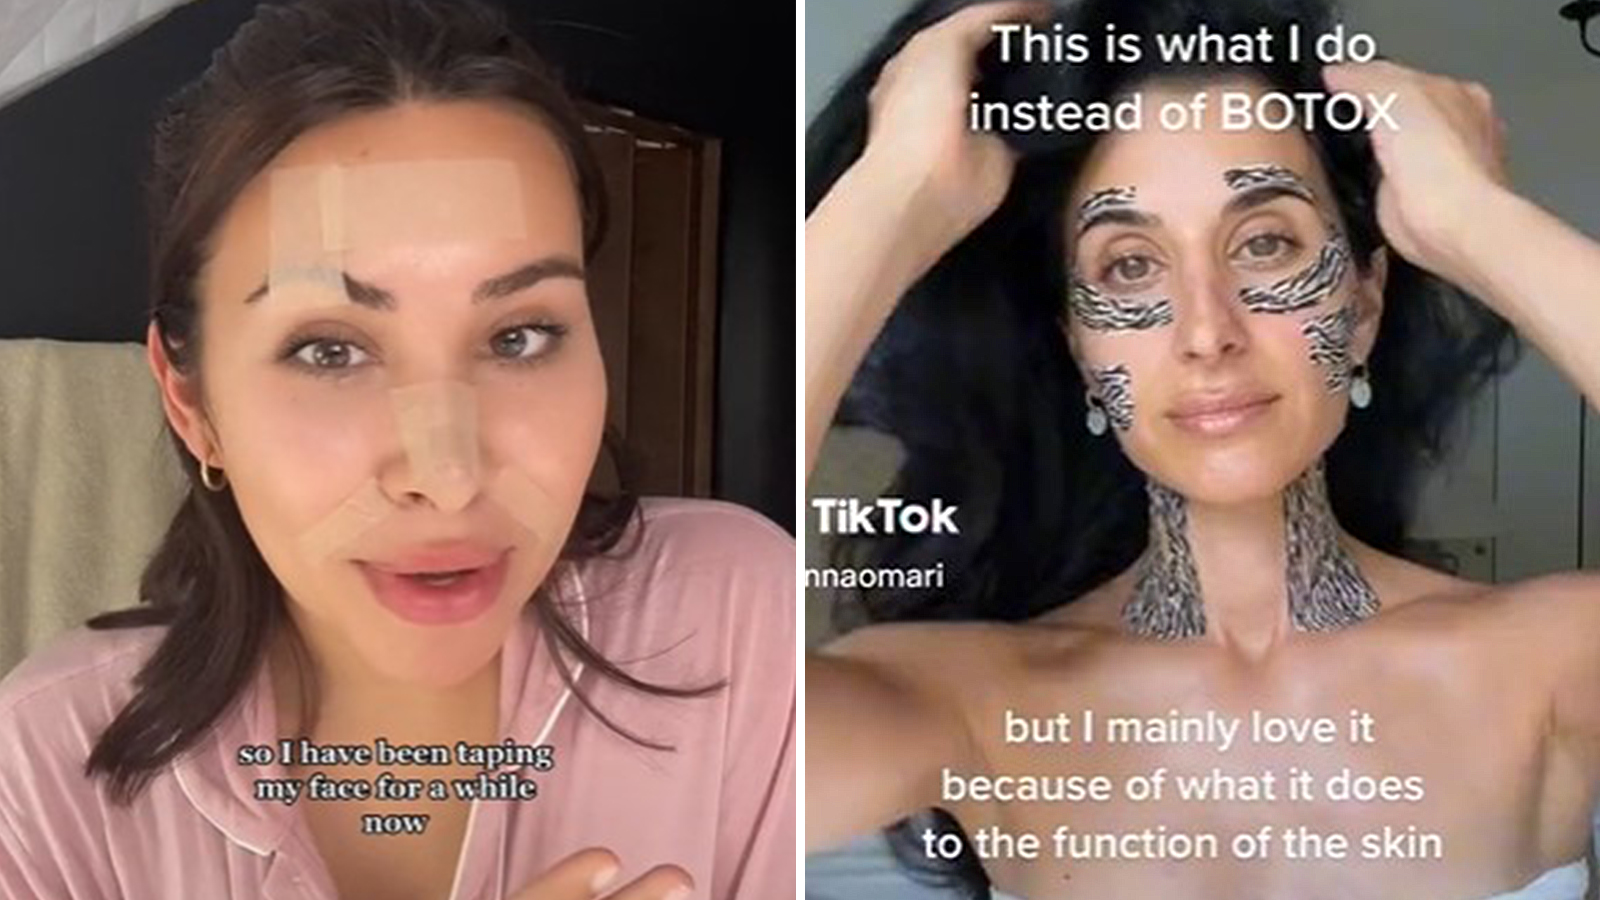 Face Tape: Why Social Media Influencers Are Taping Their Faces